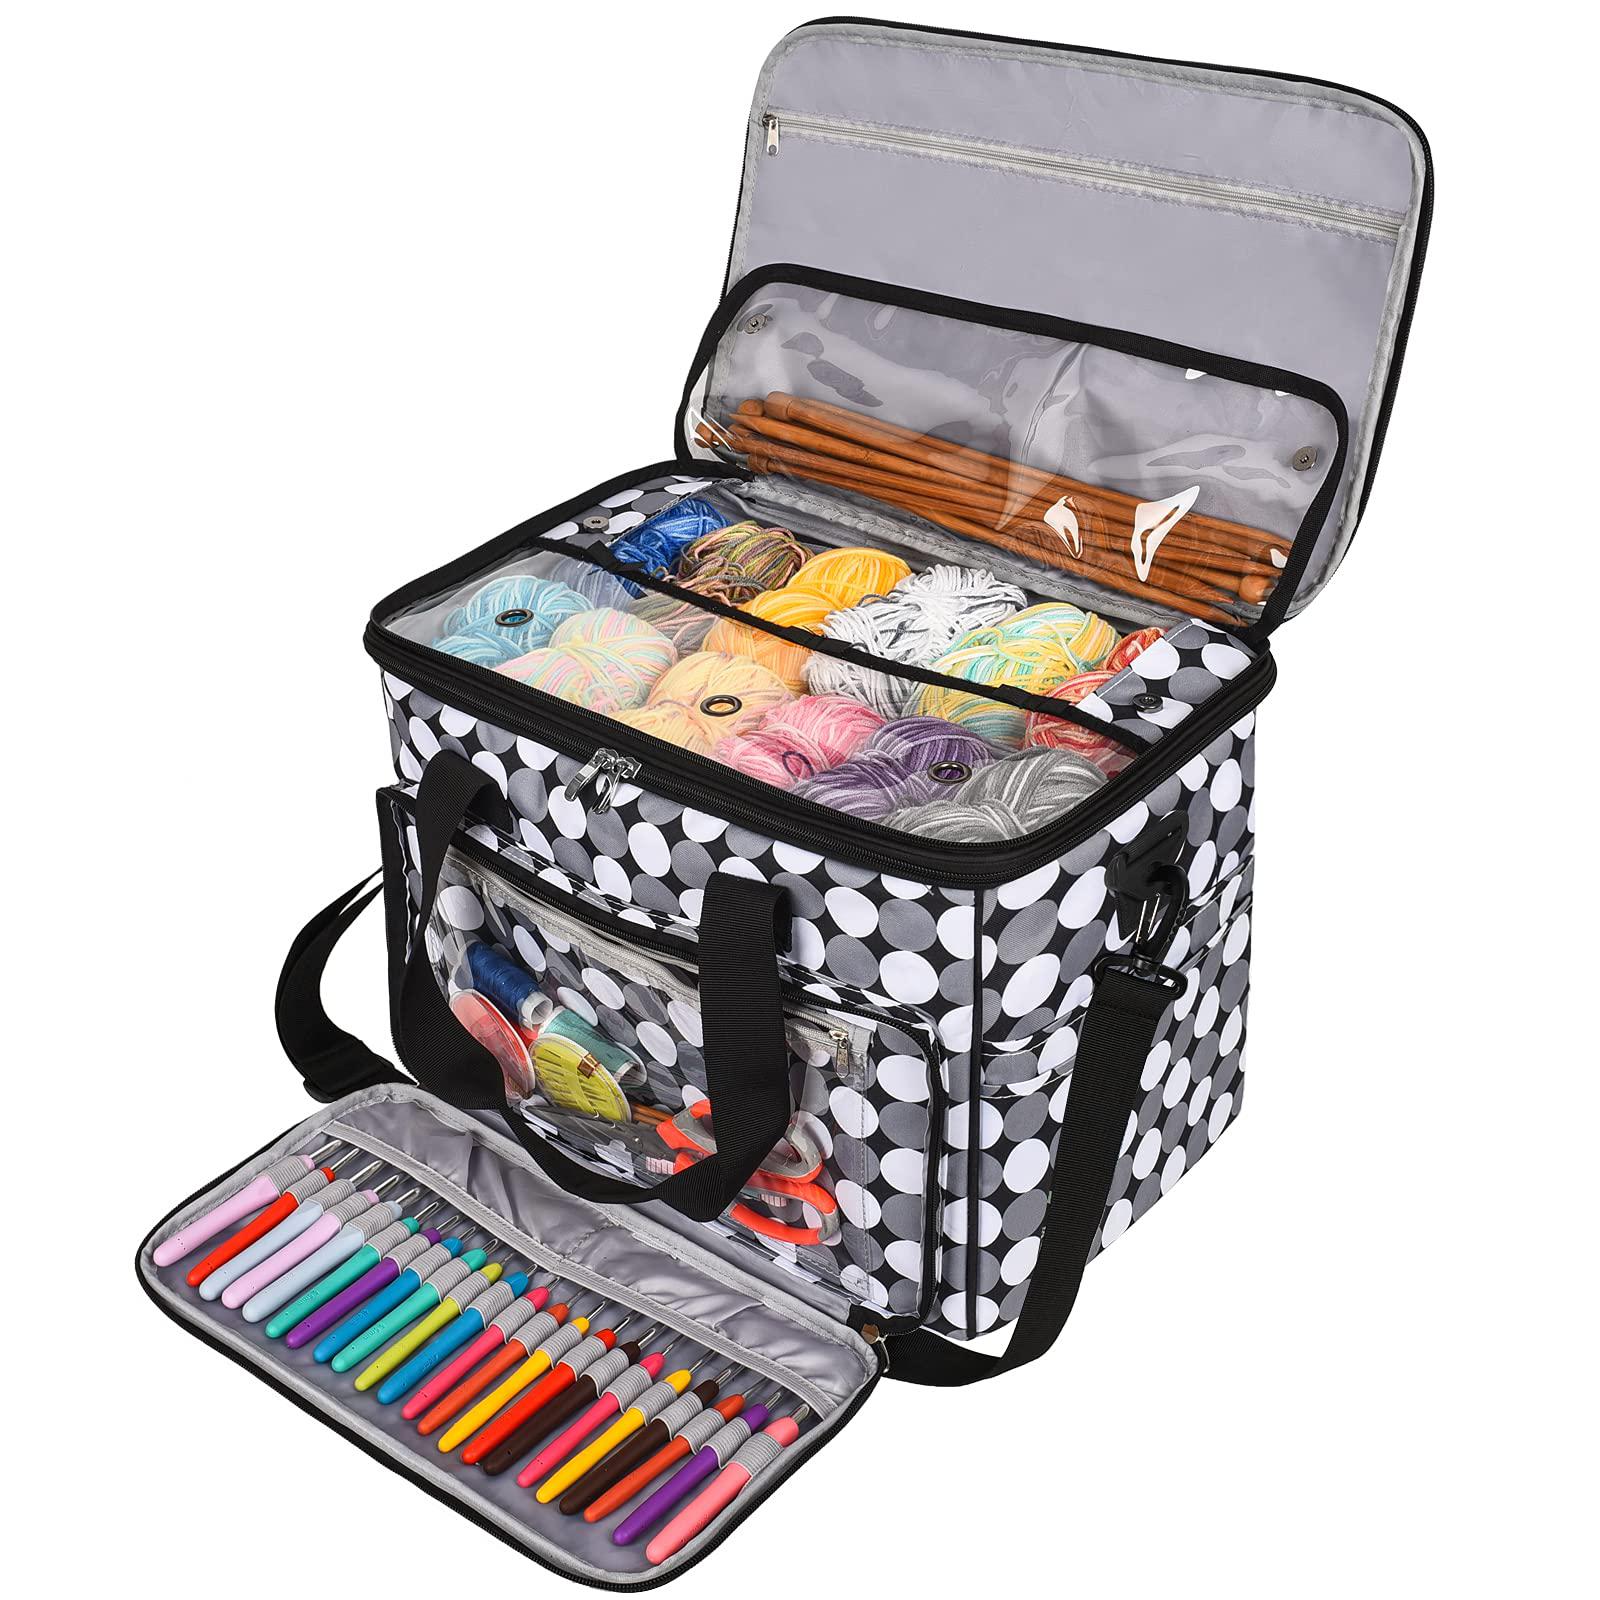 TOKSKS knitting bag, yarn tote organizer with cover and ajustable inner  divider for crochet hooks, knitting needles(up to 14), yarn